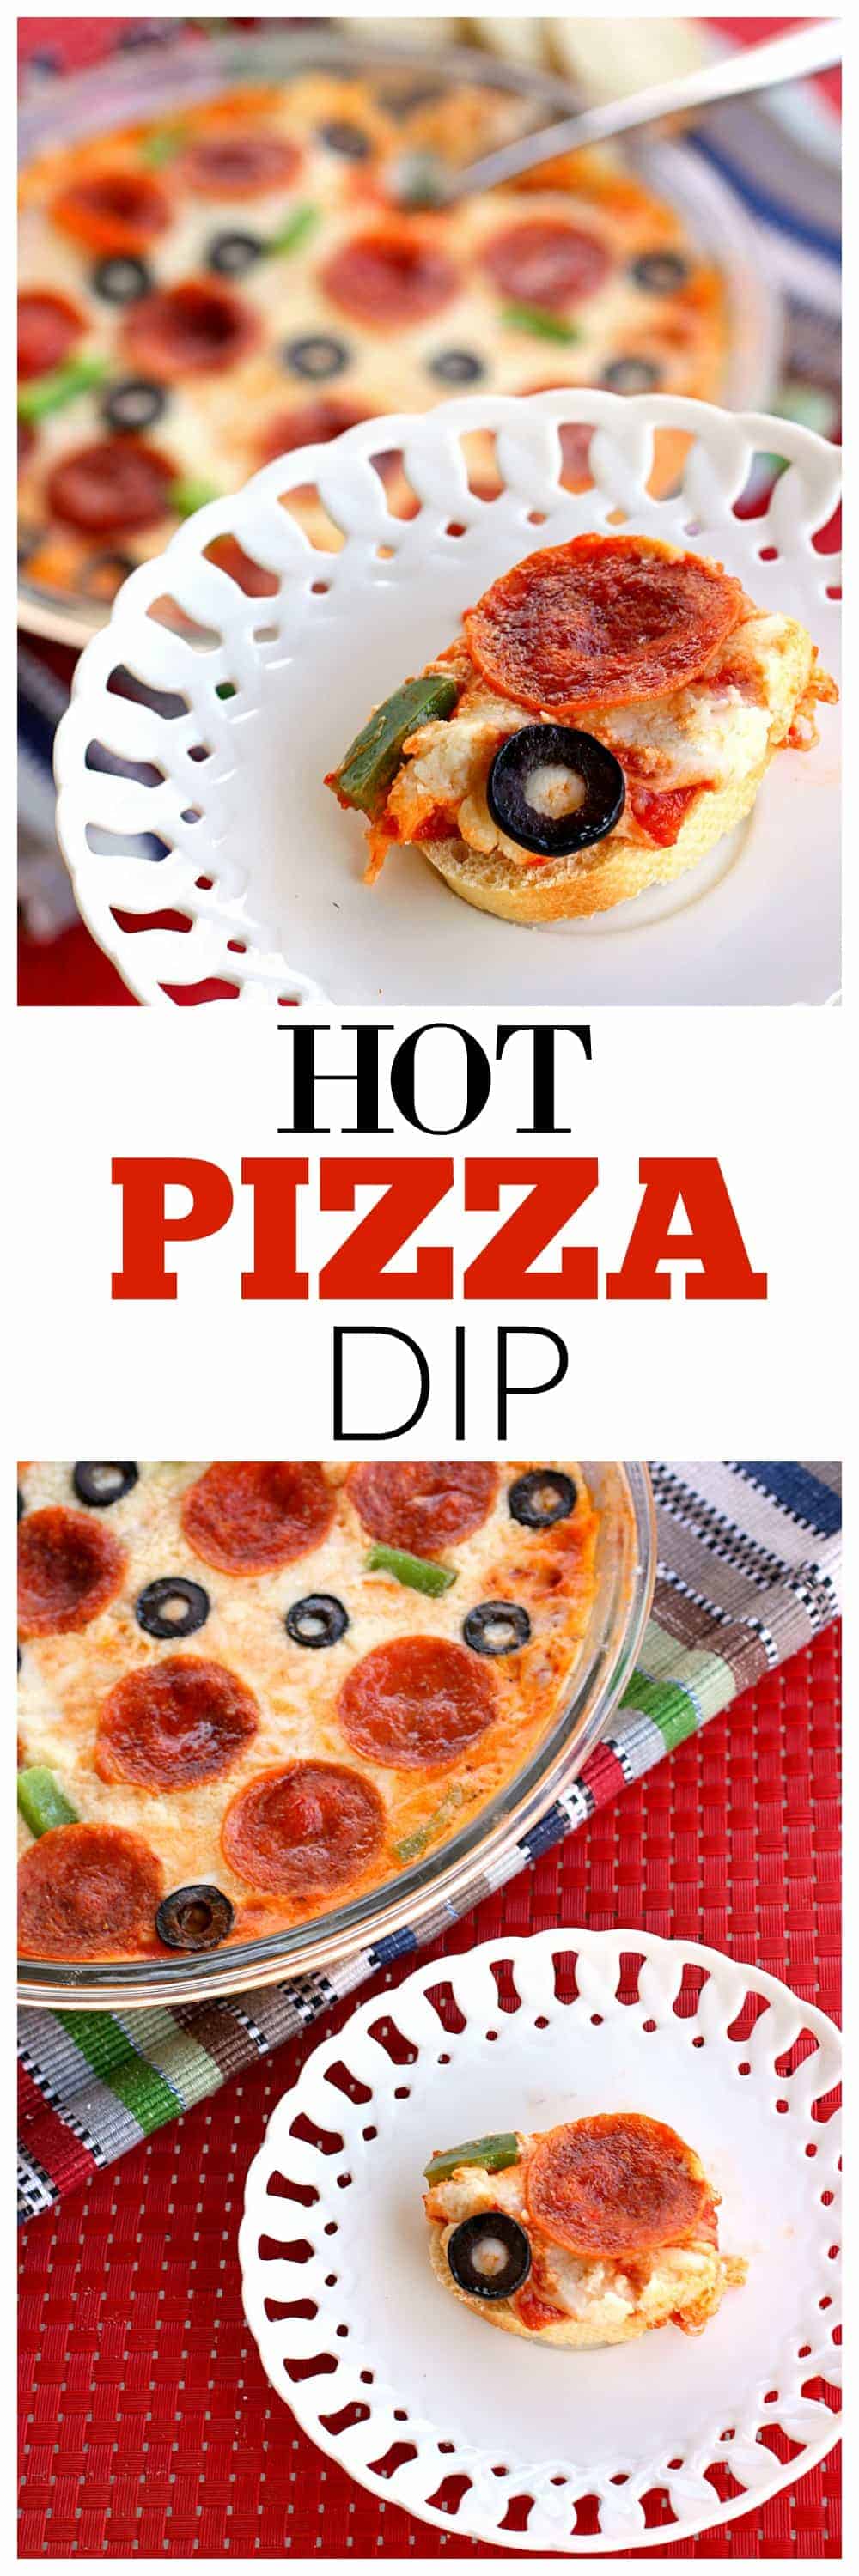 This Hot Pizza Dip tastes just like pizza with cream cheese, Italian seasonings, pizza sauce, and pepperoni! #hot #pizza #dip #appetizer #italian #recipe